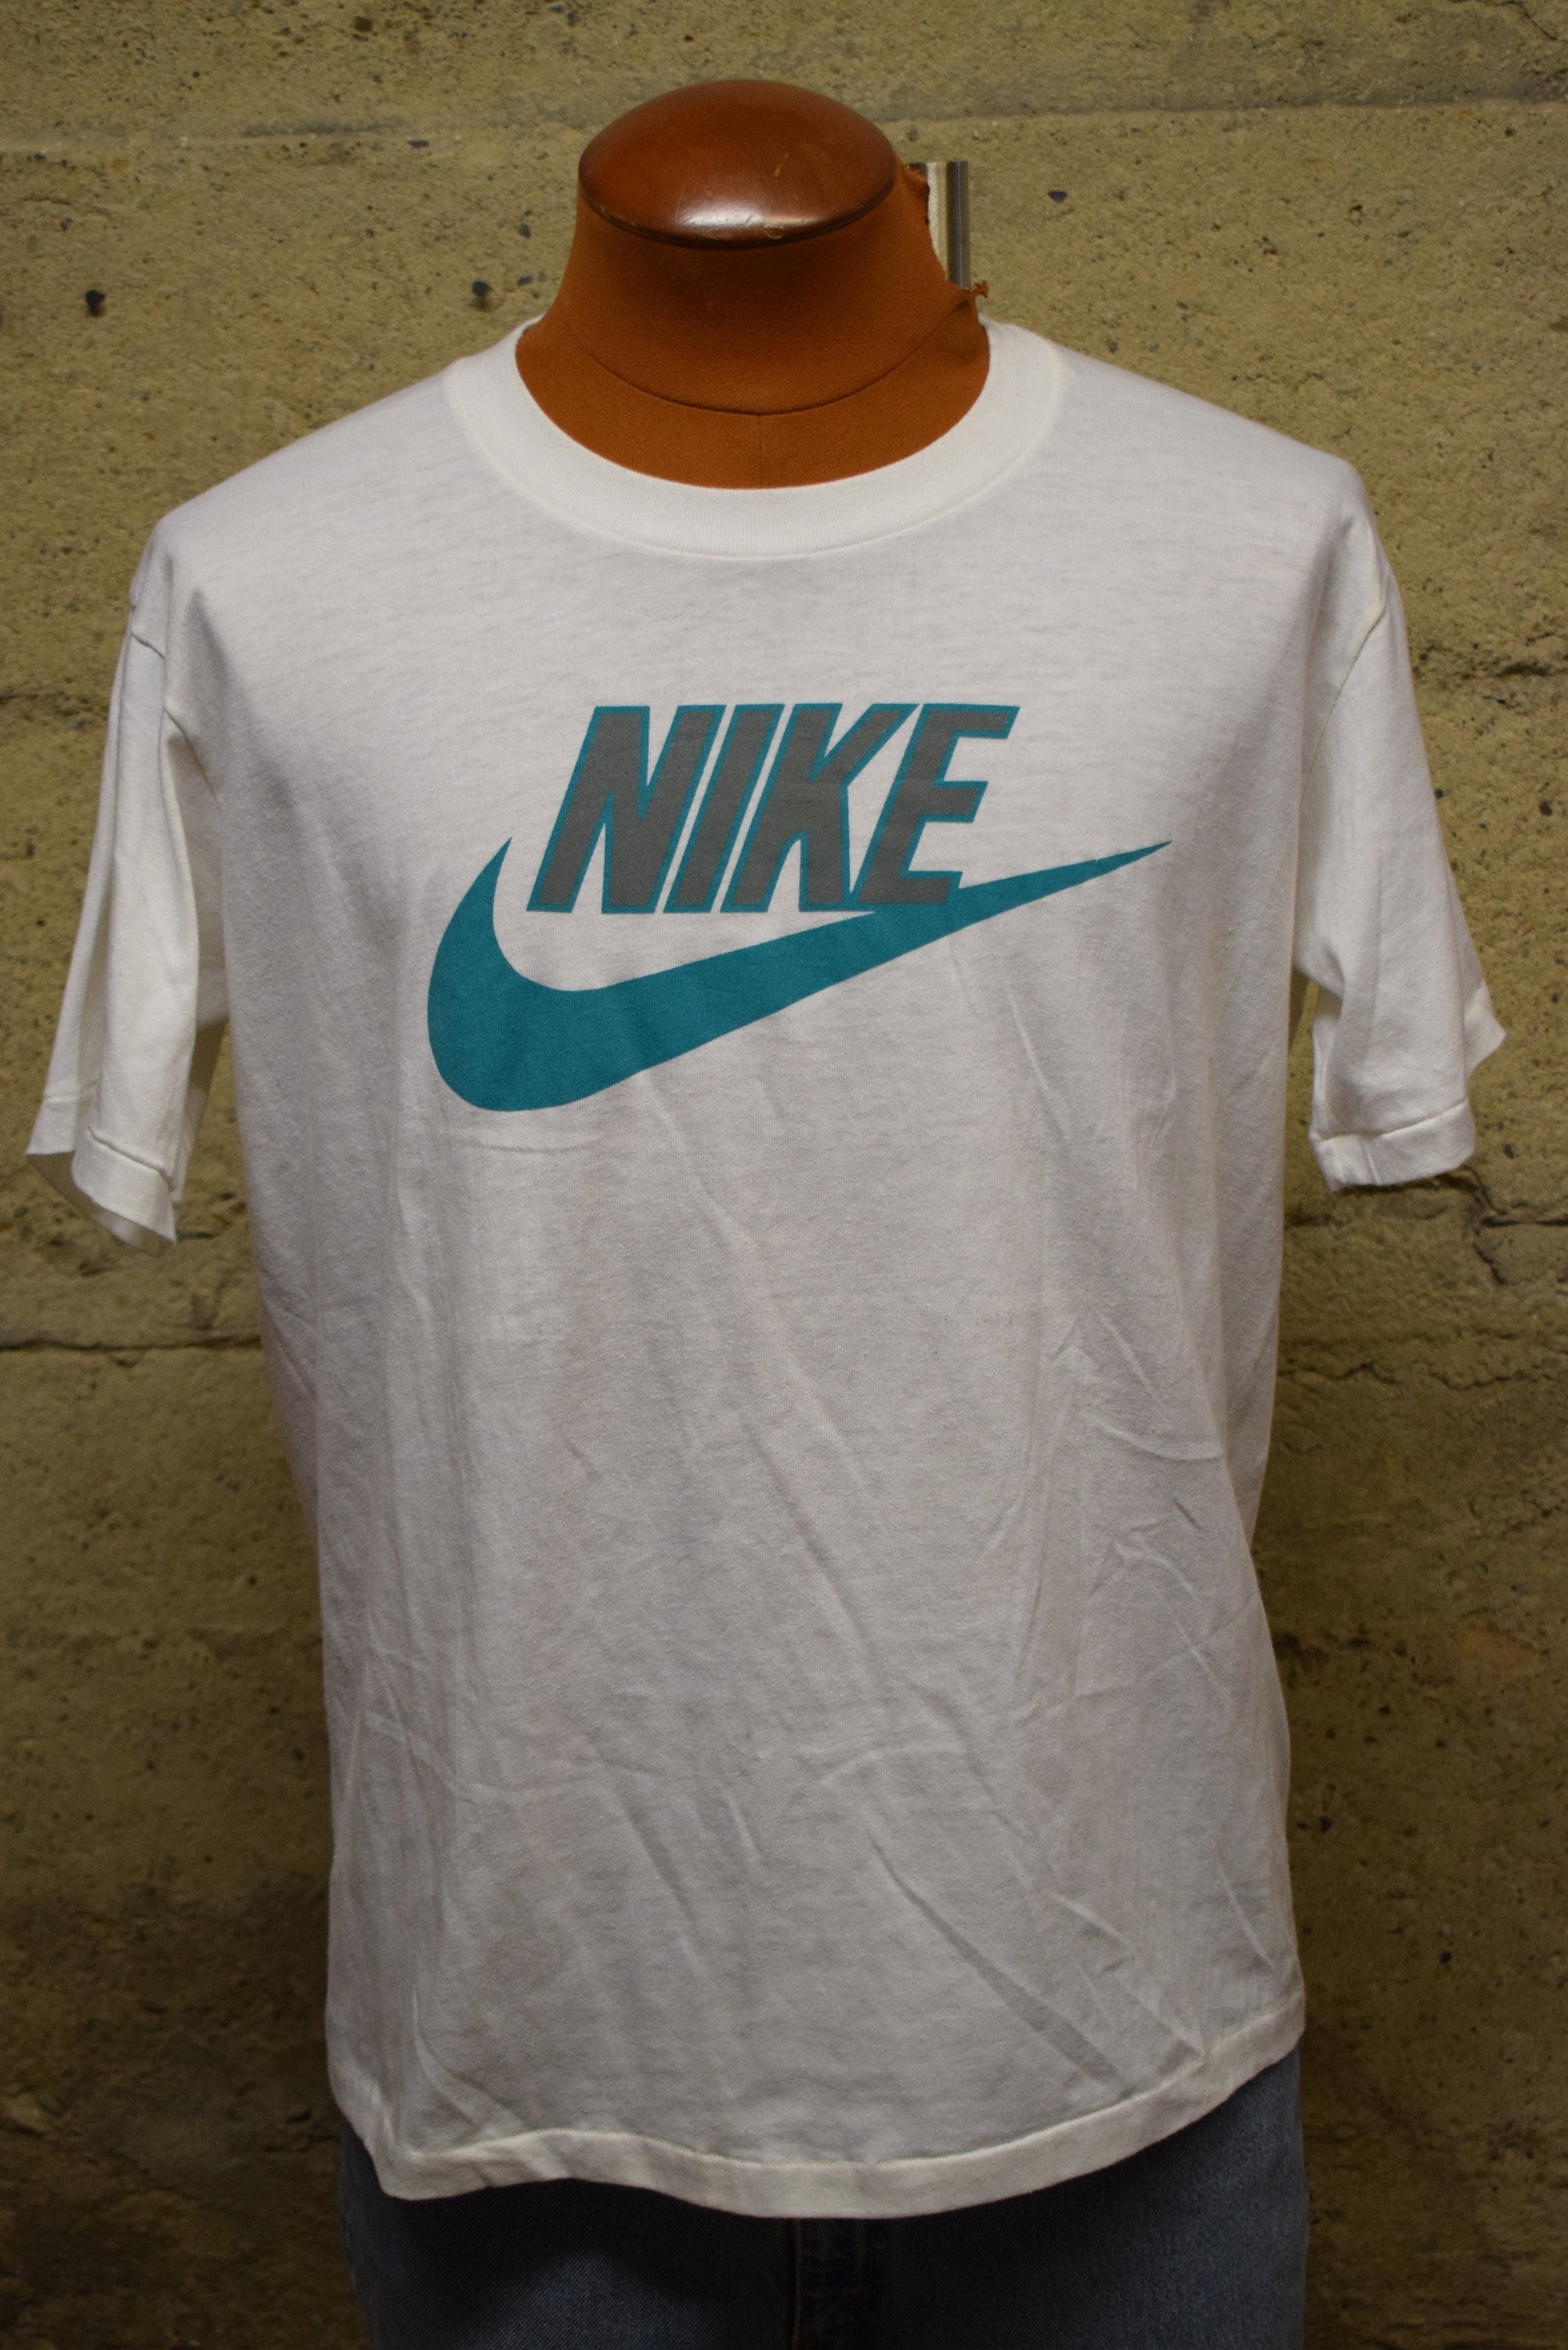 Rare 90's Vintage Nike Tennis Single Stitch T-shirt made in USA